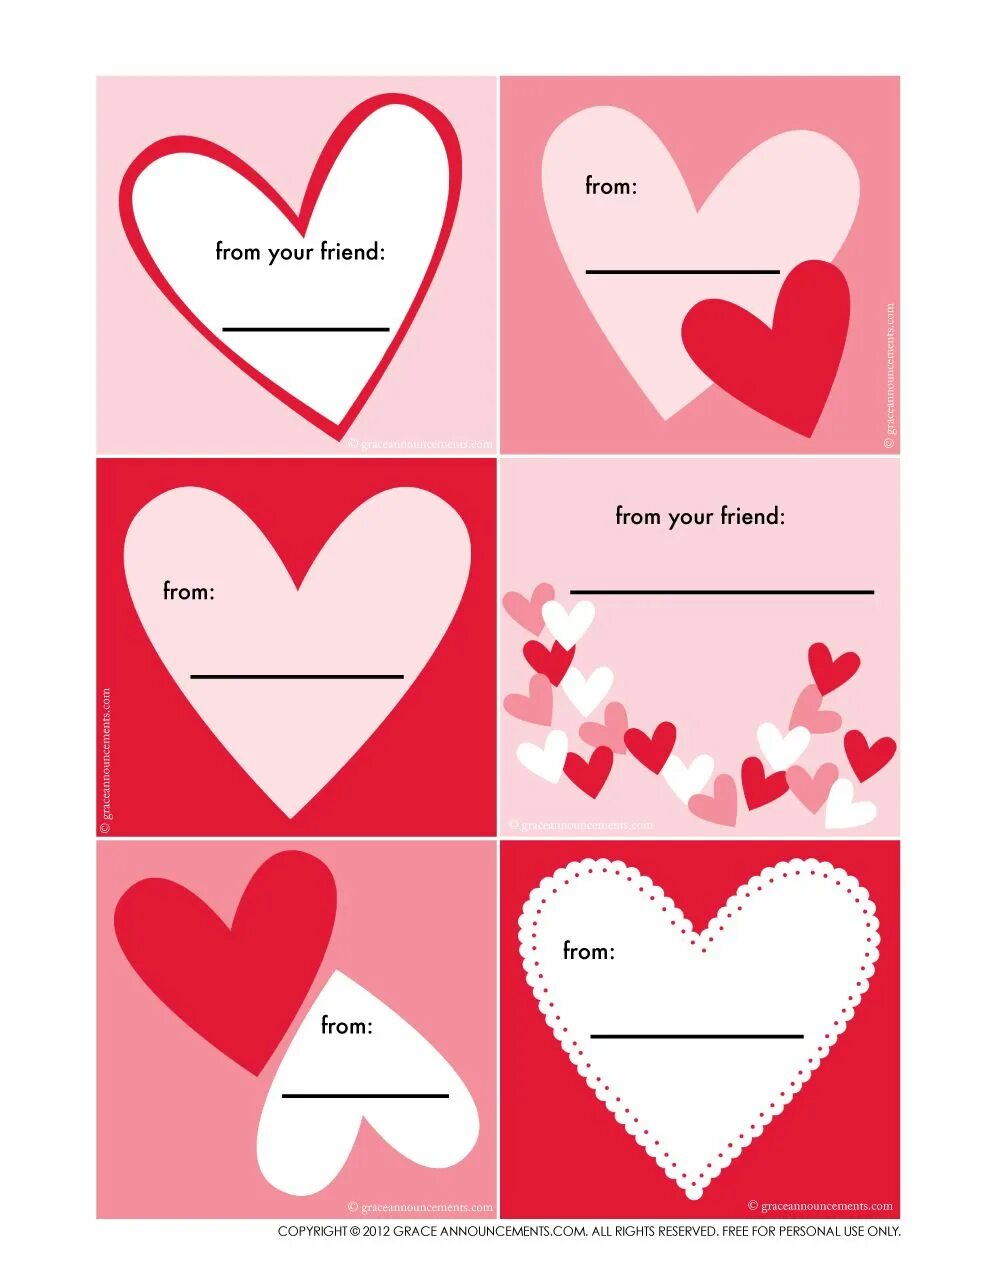 Printable cards. Валентинка from. Английские валентинки from to. St Valentines Cards for Kids. St Valentine's Day Cards for Kids.